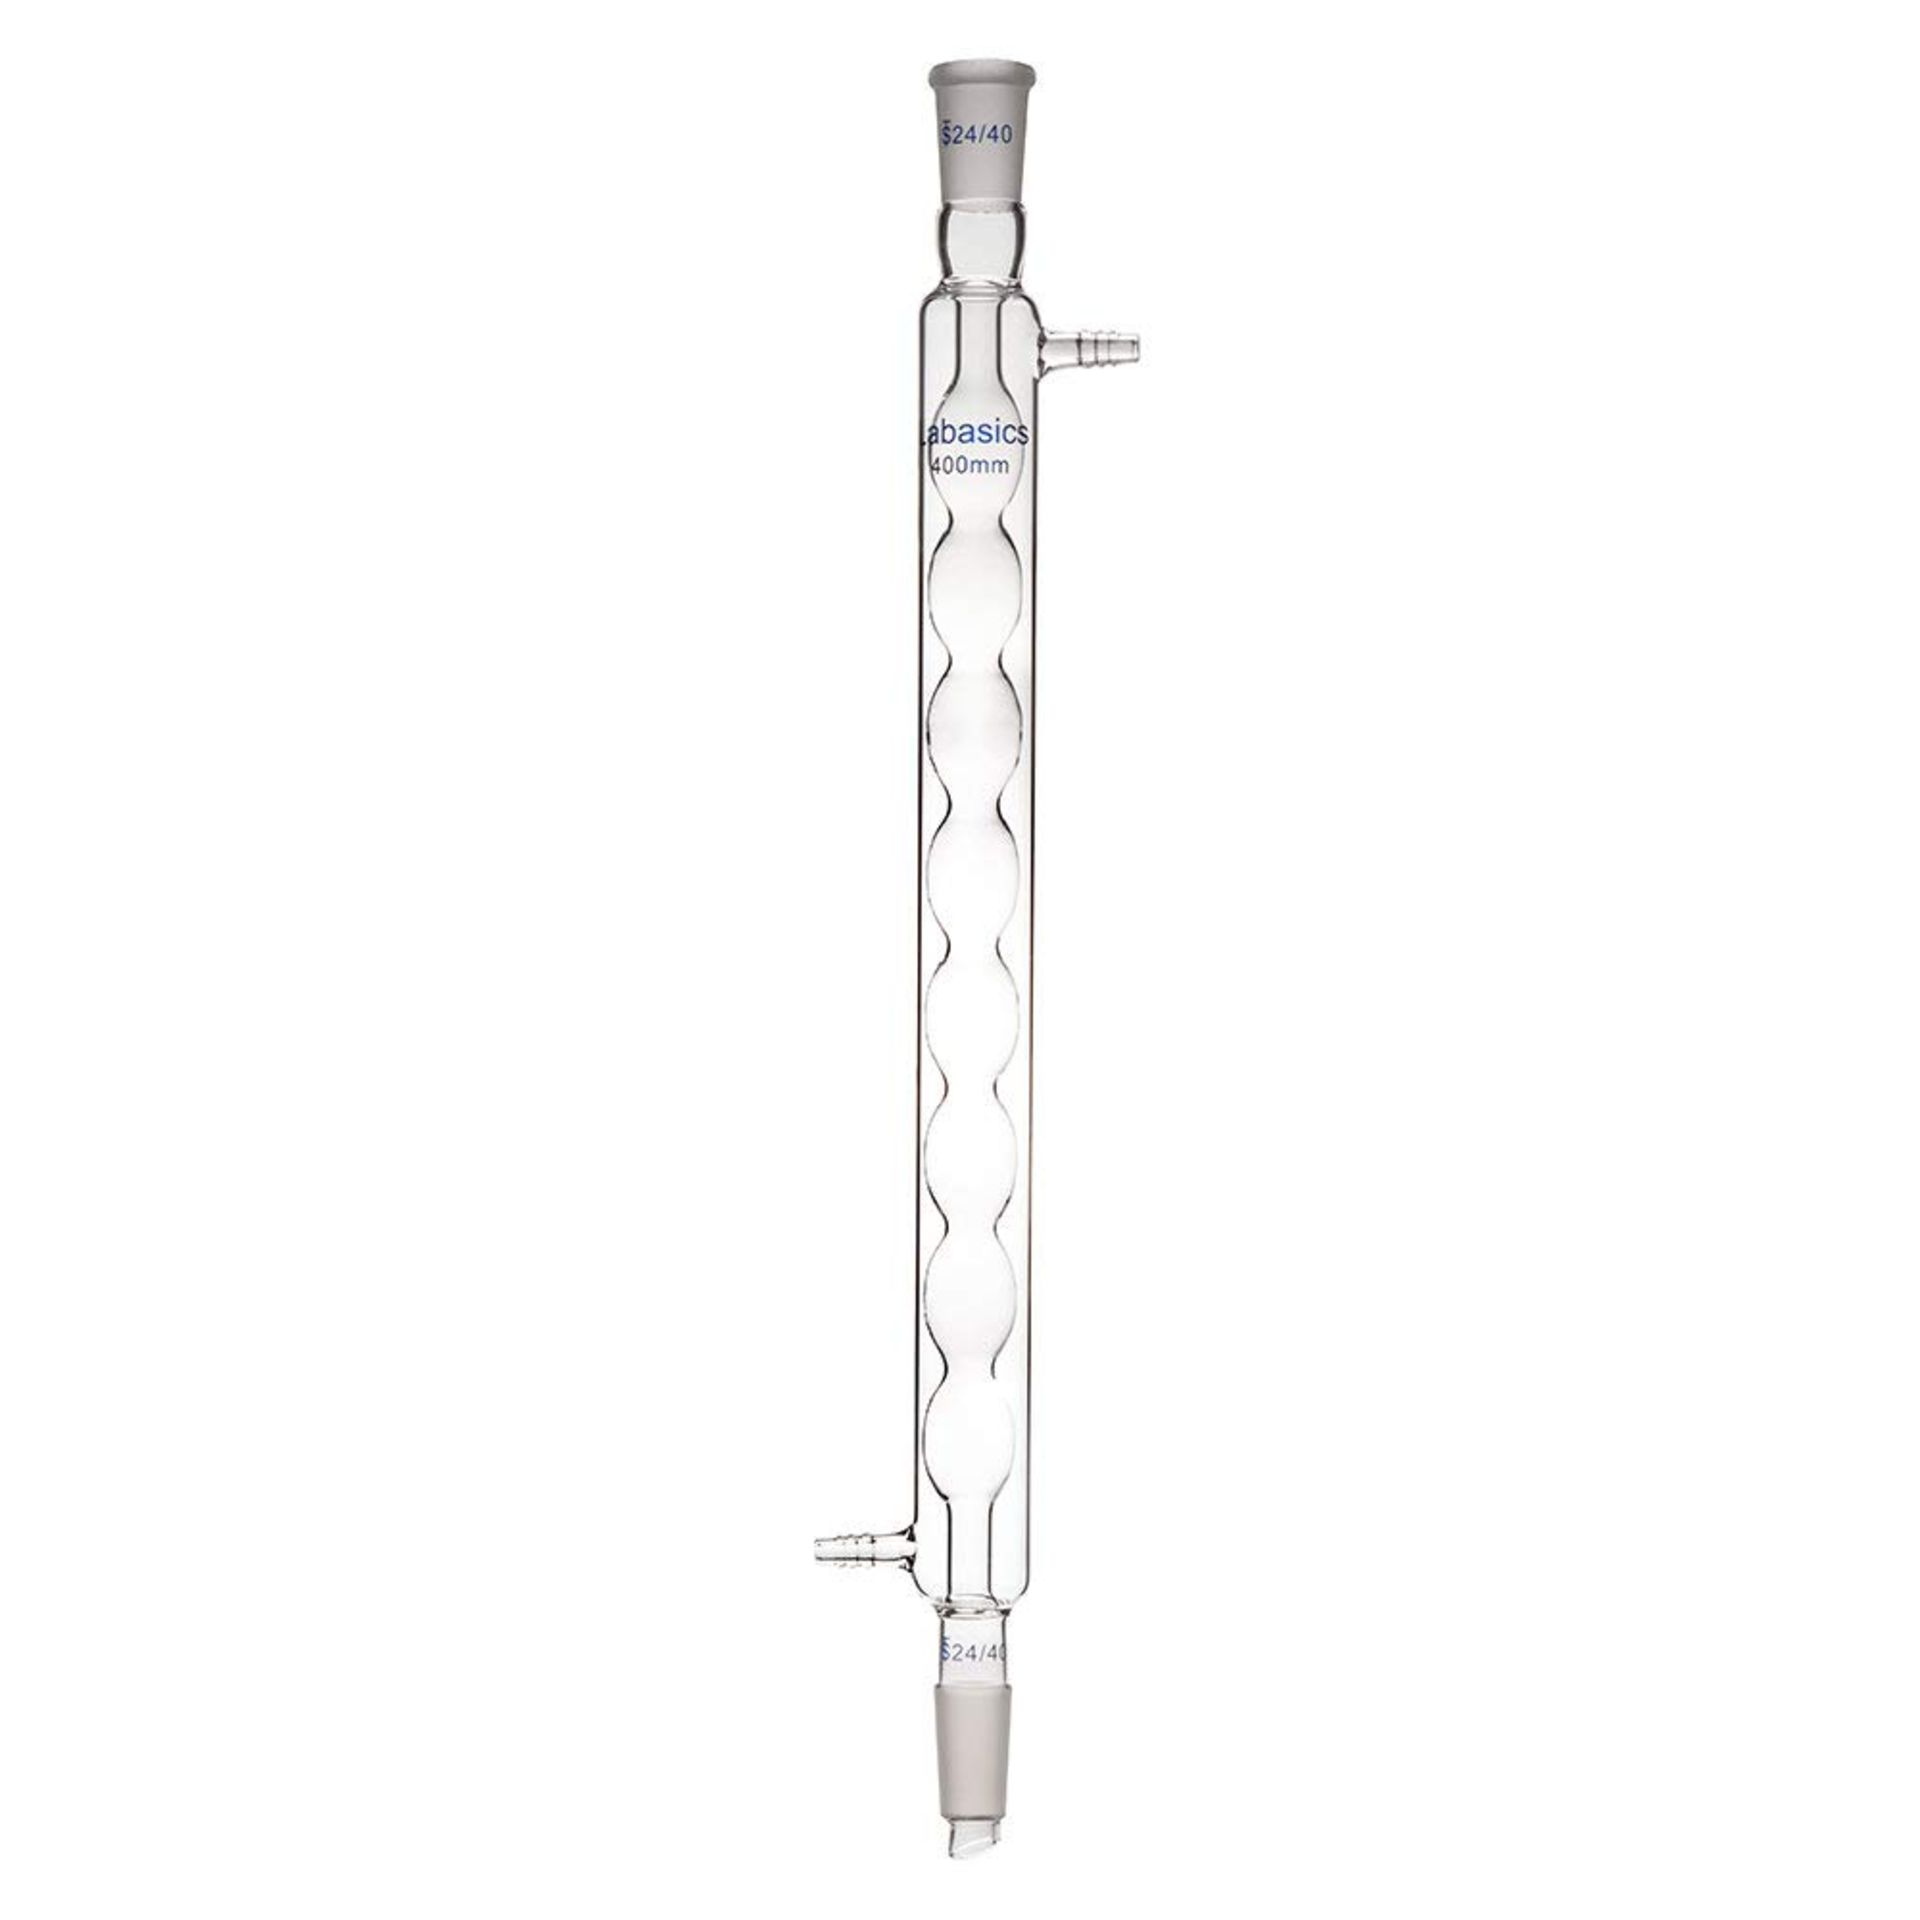 RRP £47.99 Labasics Borosilicate Glass Allihn Condenser with 24/40 Joint 400mm Jacket Length Lab